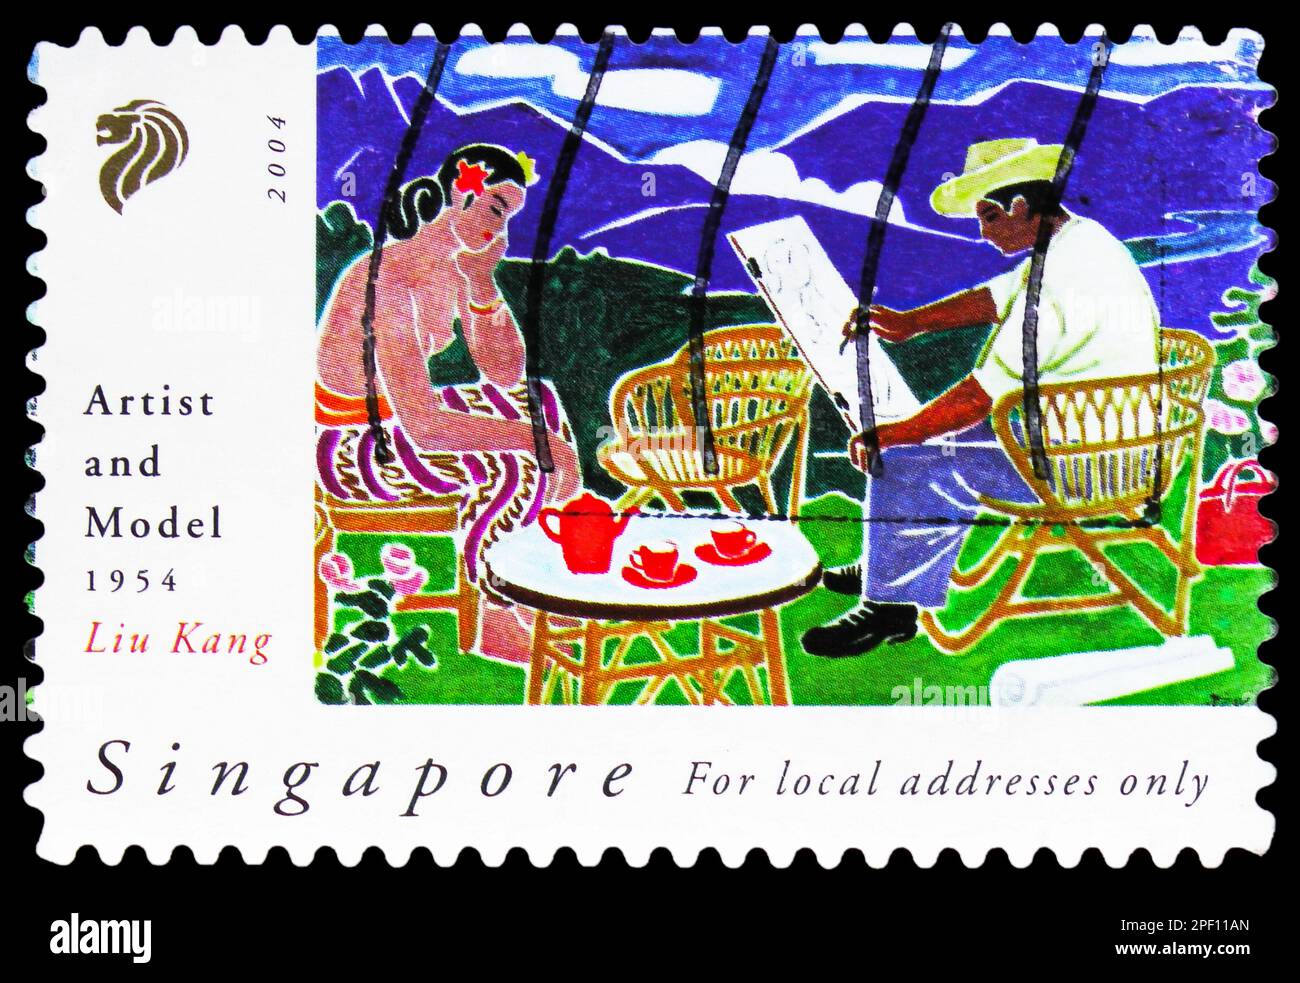 MOSCOW, RUSSIA - FEBRUARY 17, 2023: Postage stamp printed in Singapore shows 'Artist and Model' 1954, Art Series - Liu Kang and Ong Kim Seng serie, ci Stock Photo